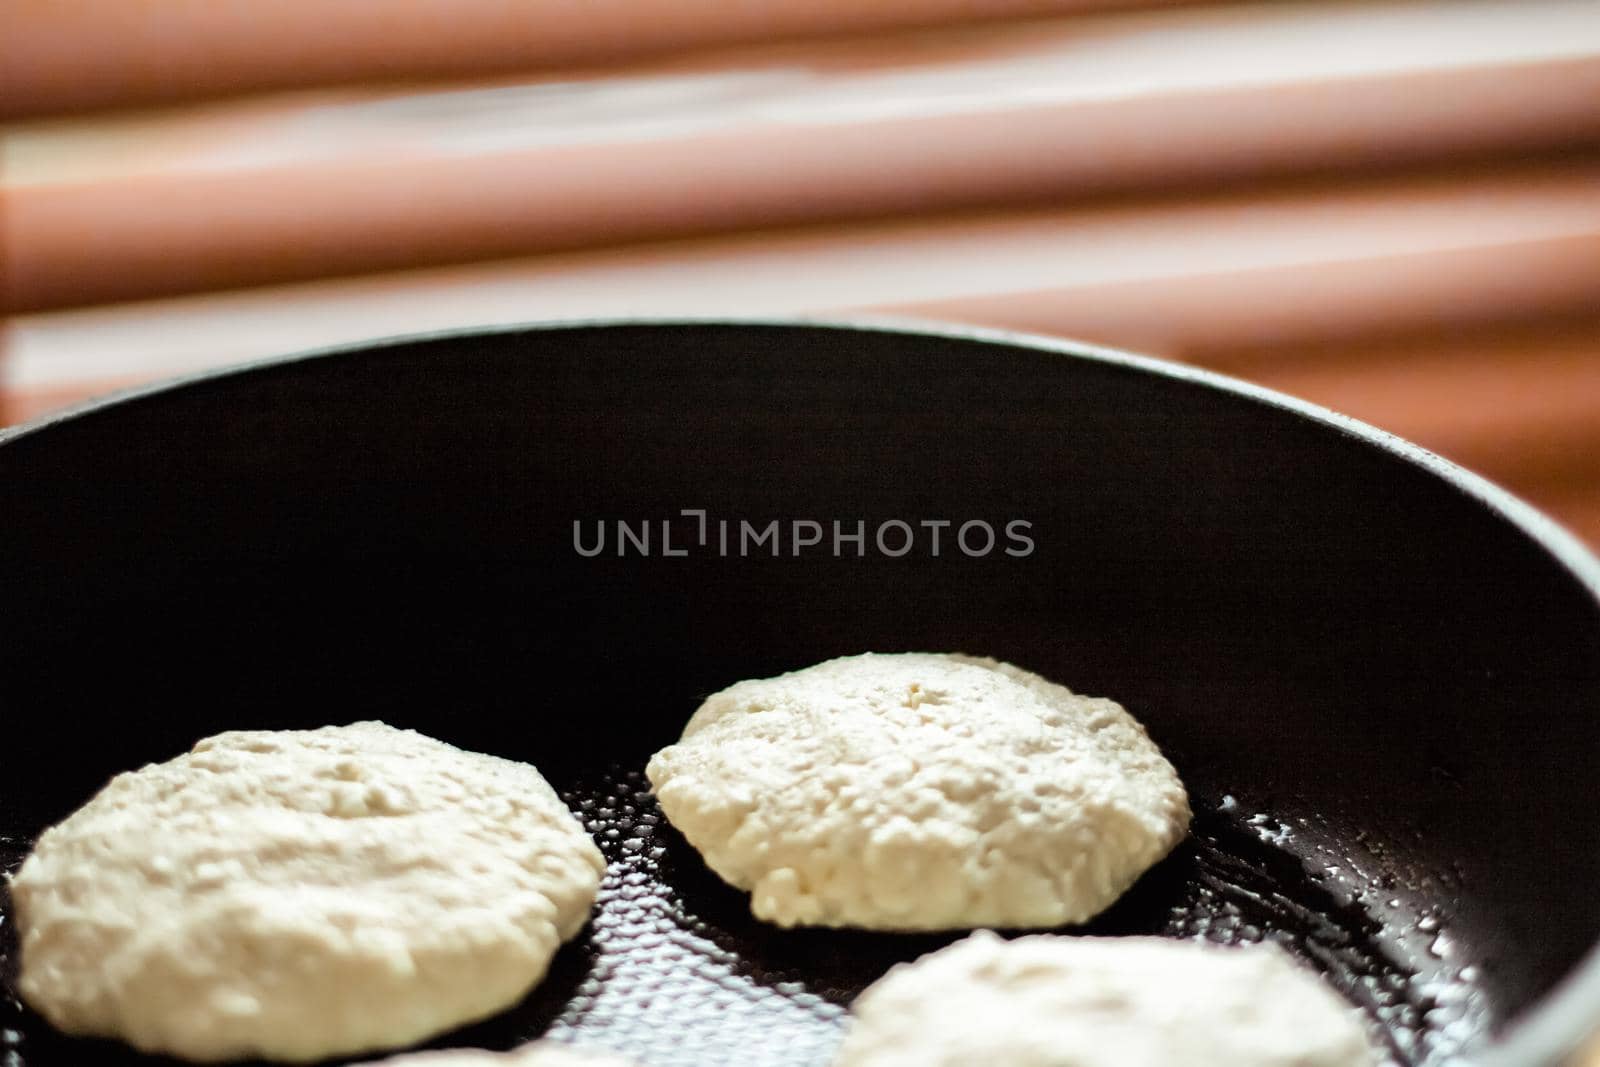 Pancakes on frying pan, rustic cookbook recipe - weekend cooking, food blog and homemade cuisine concept. Making your favorite pancakes